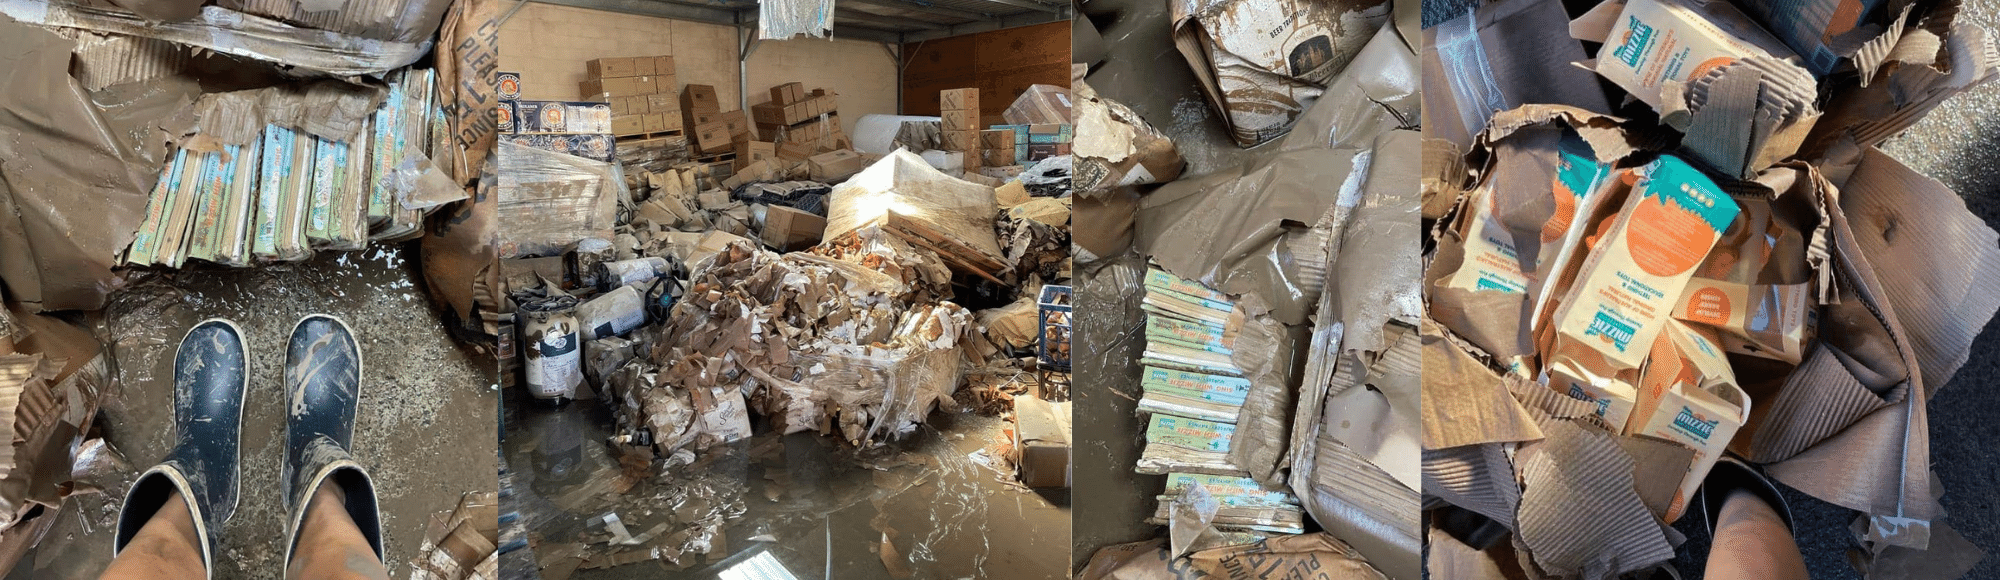 This photo shows the impact of the 2022 Brisbane floods on the Mizzie Warehouse. There is water on the floor, lots of mud and damaged pallets of paper based stock. The roof has fallen in, and there is a general state of chaos.